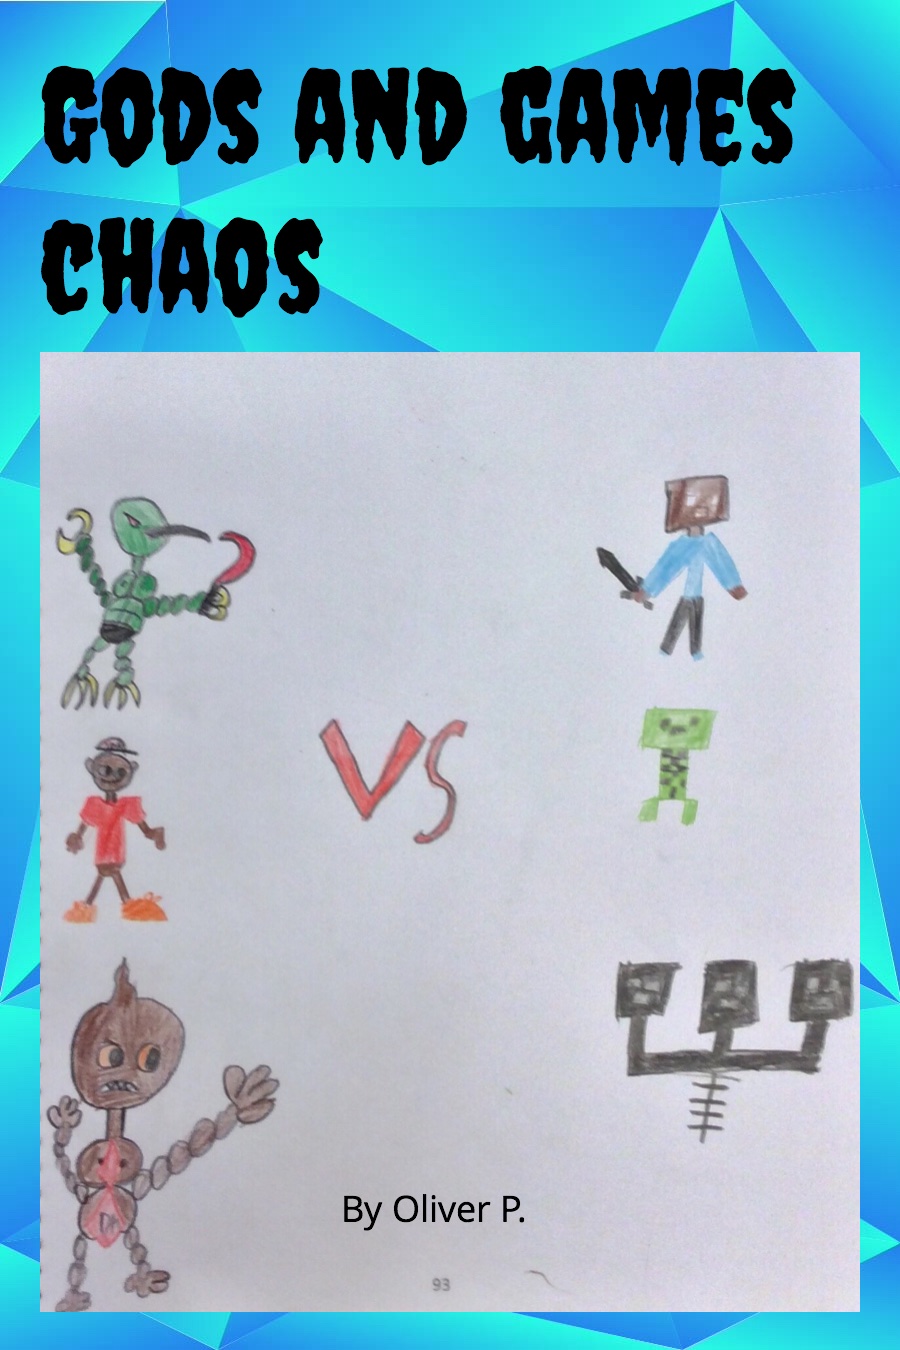 Gods and Games Chaos by Oliver P